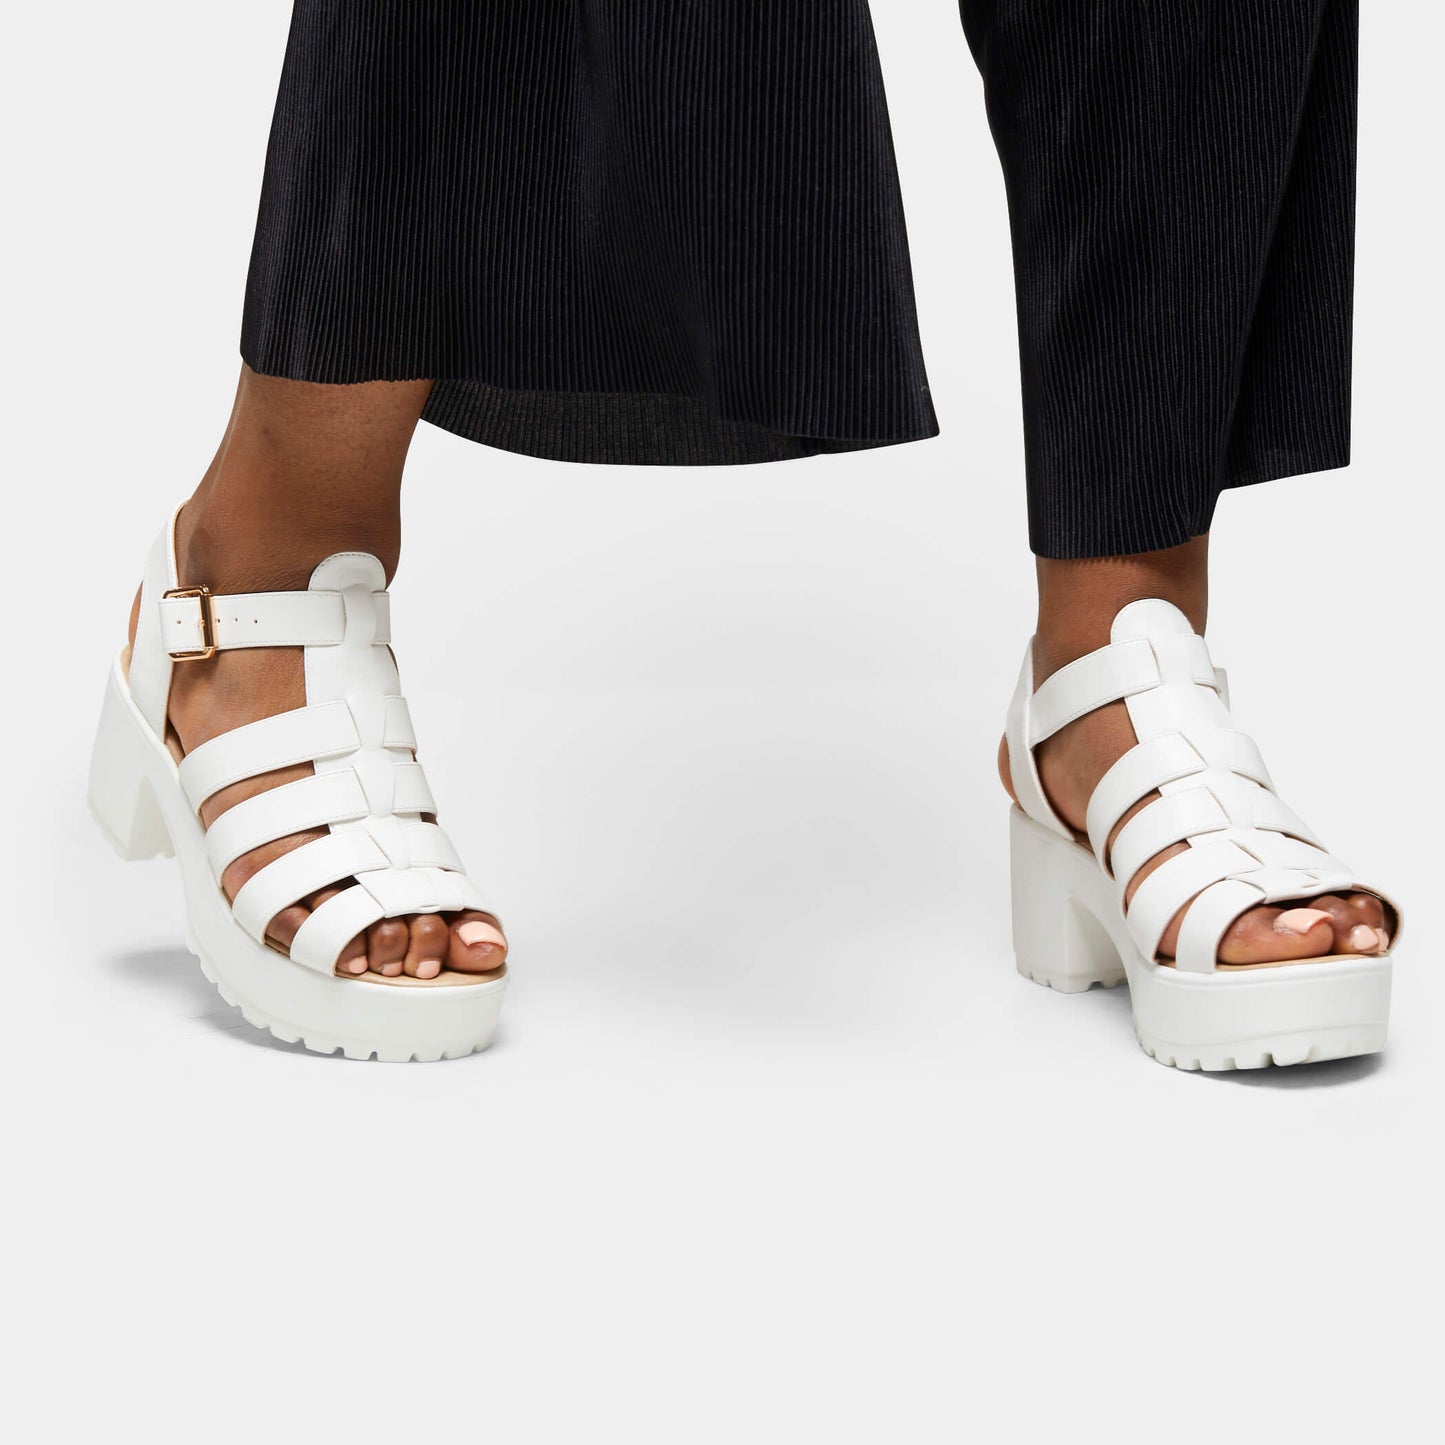 SII White Strappy Cleated Sandals - Sandals - KOI Footwear - White - Model Right View